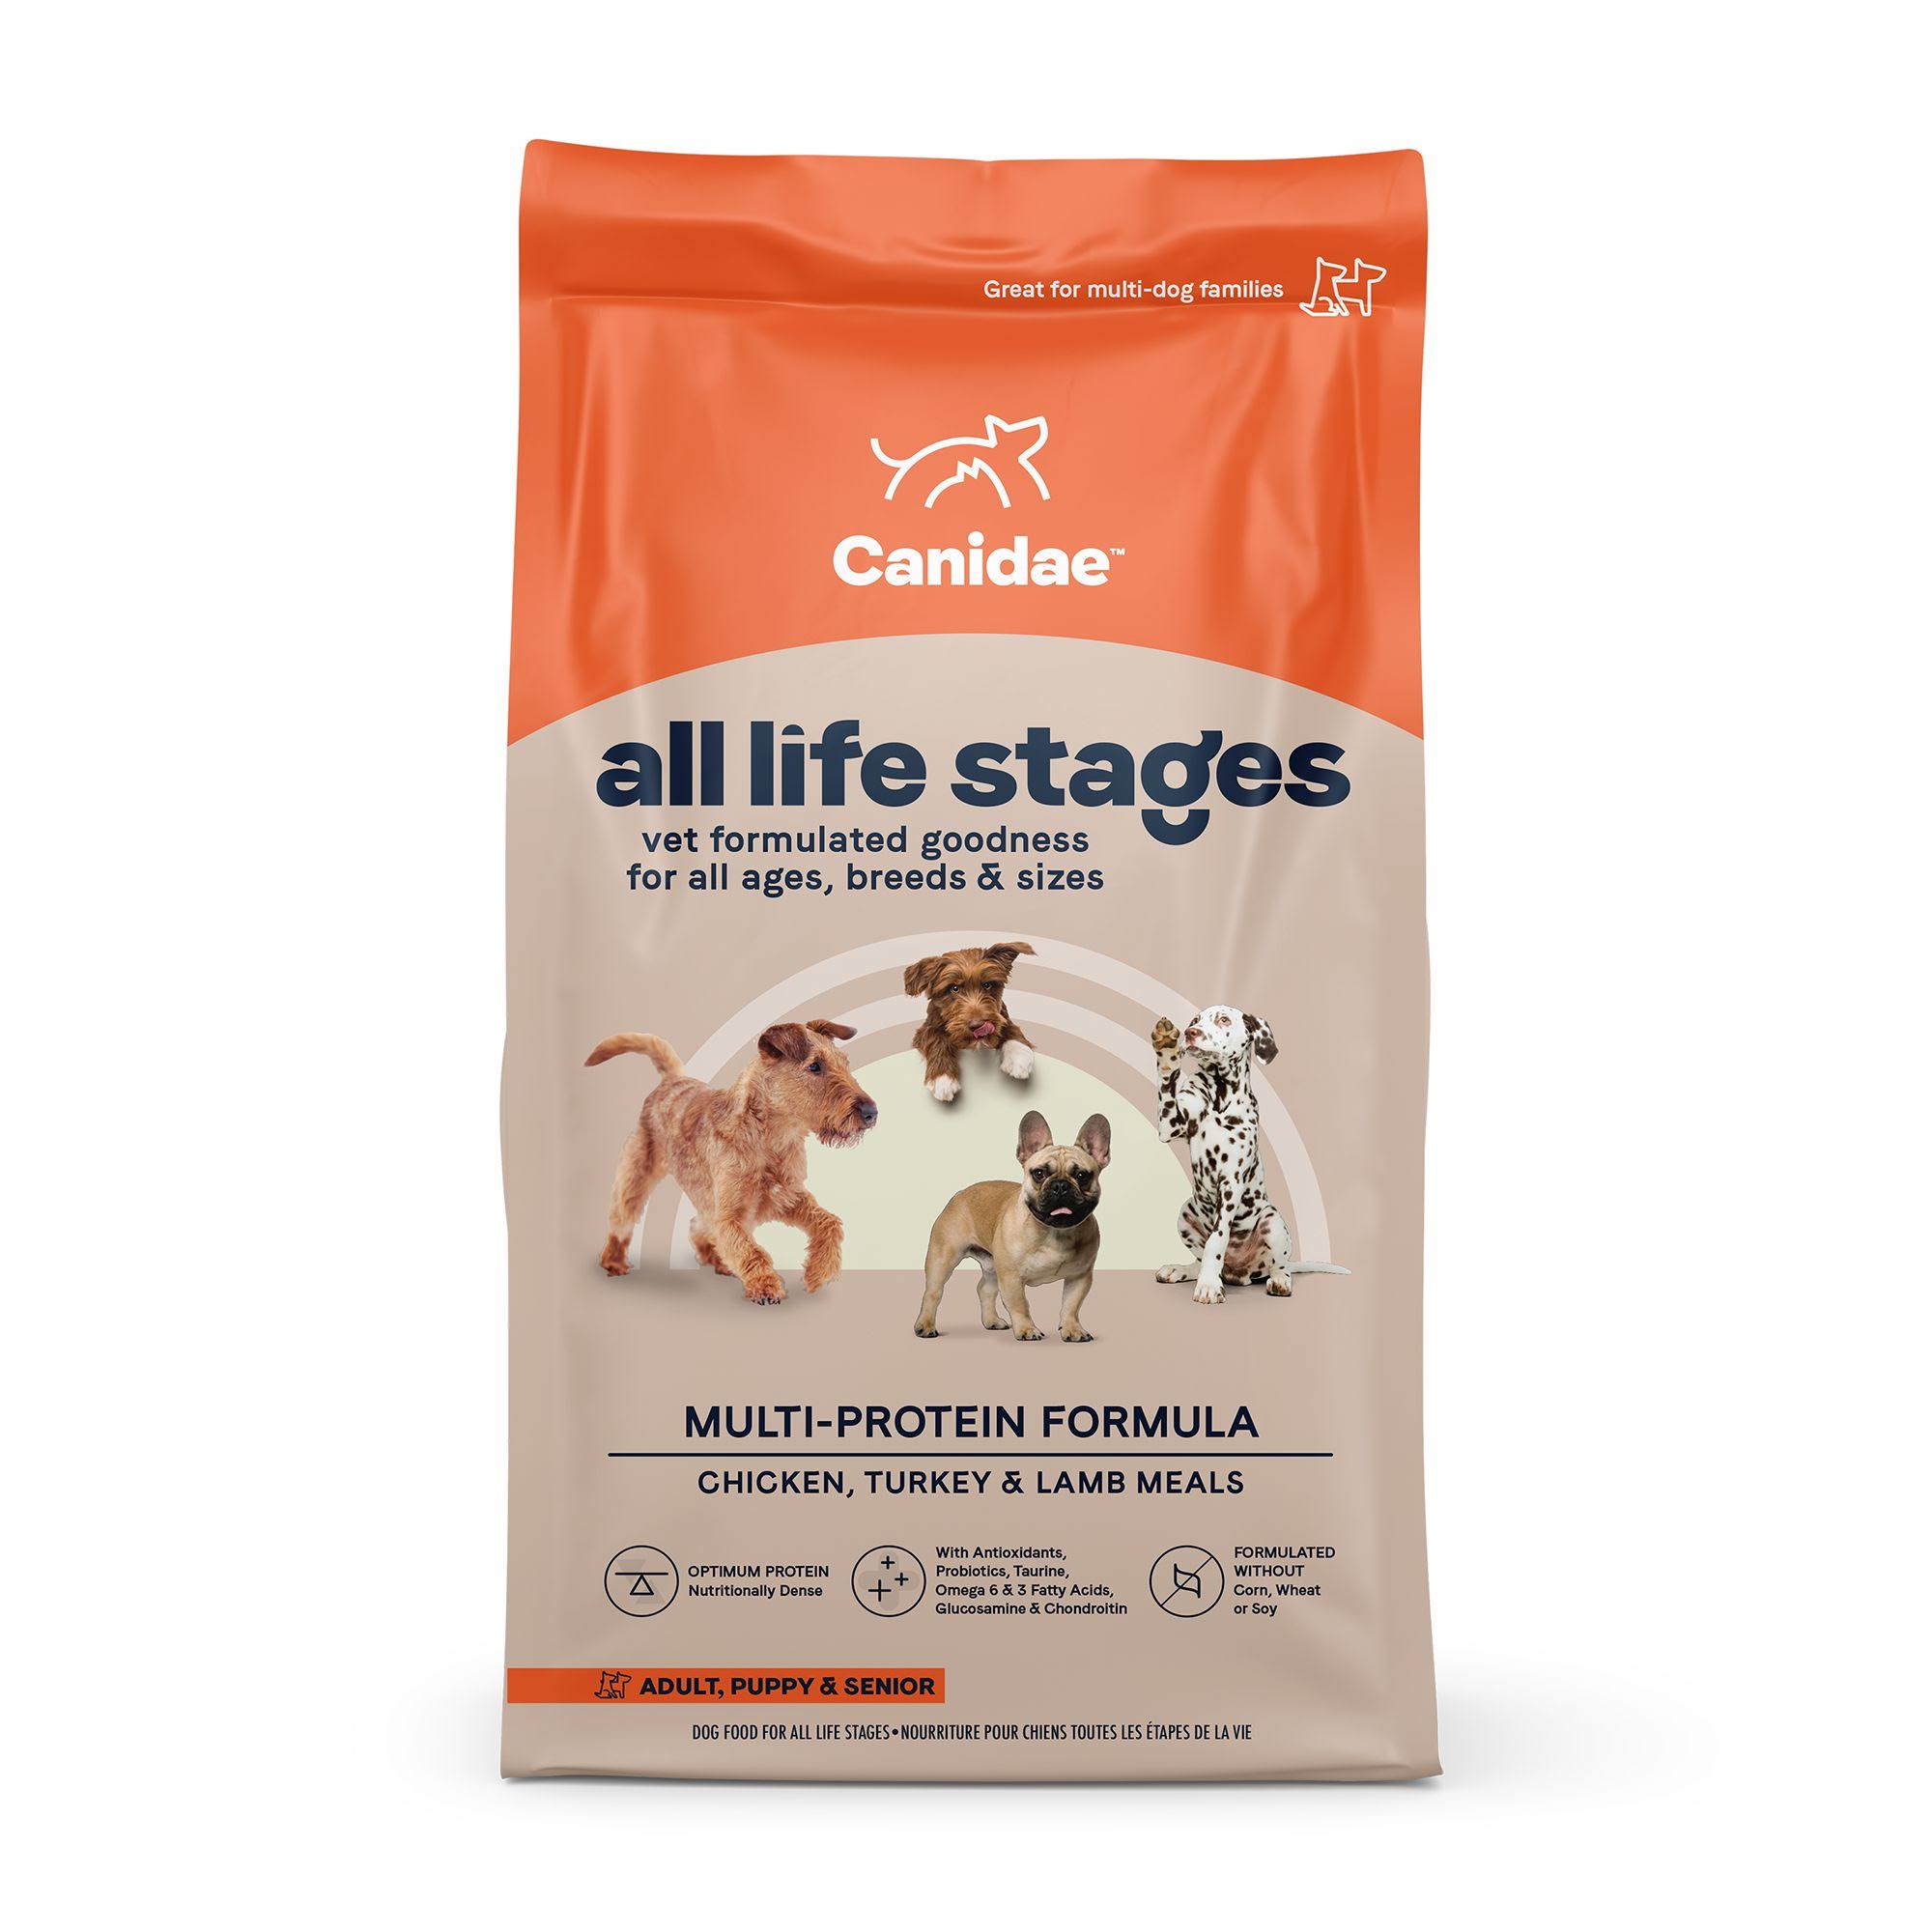 Canidae All Life Stages Dog Dry Food - 15lb